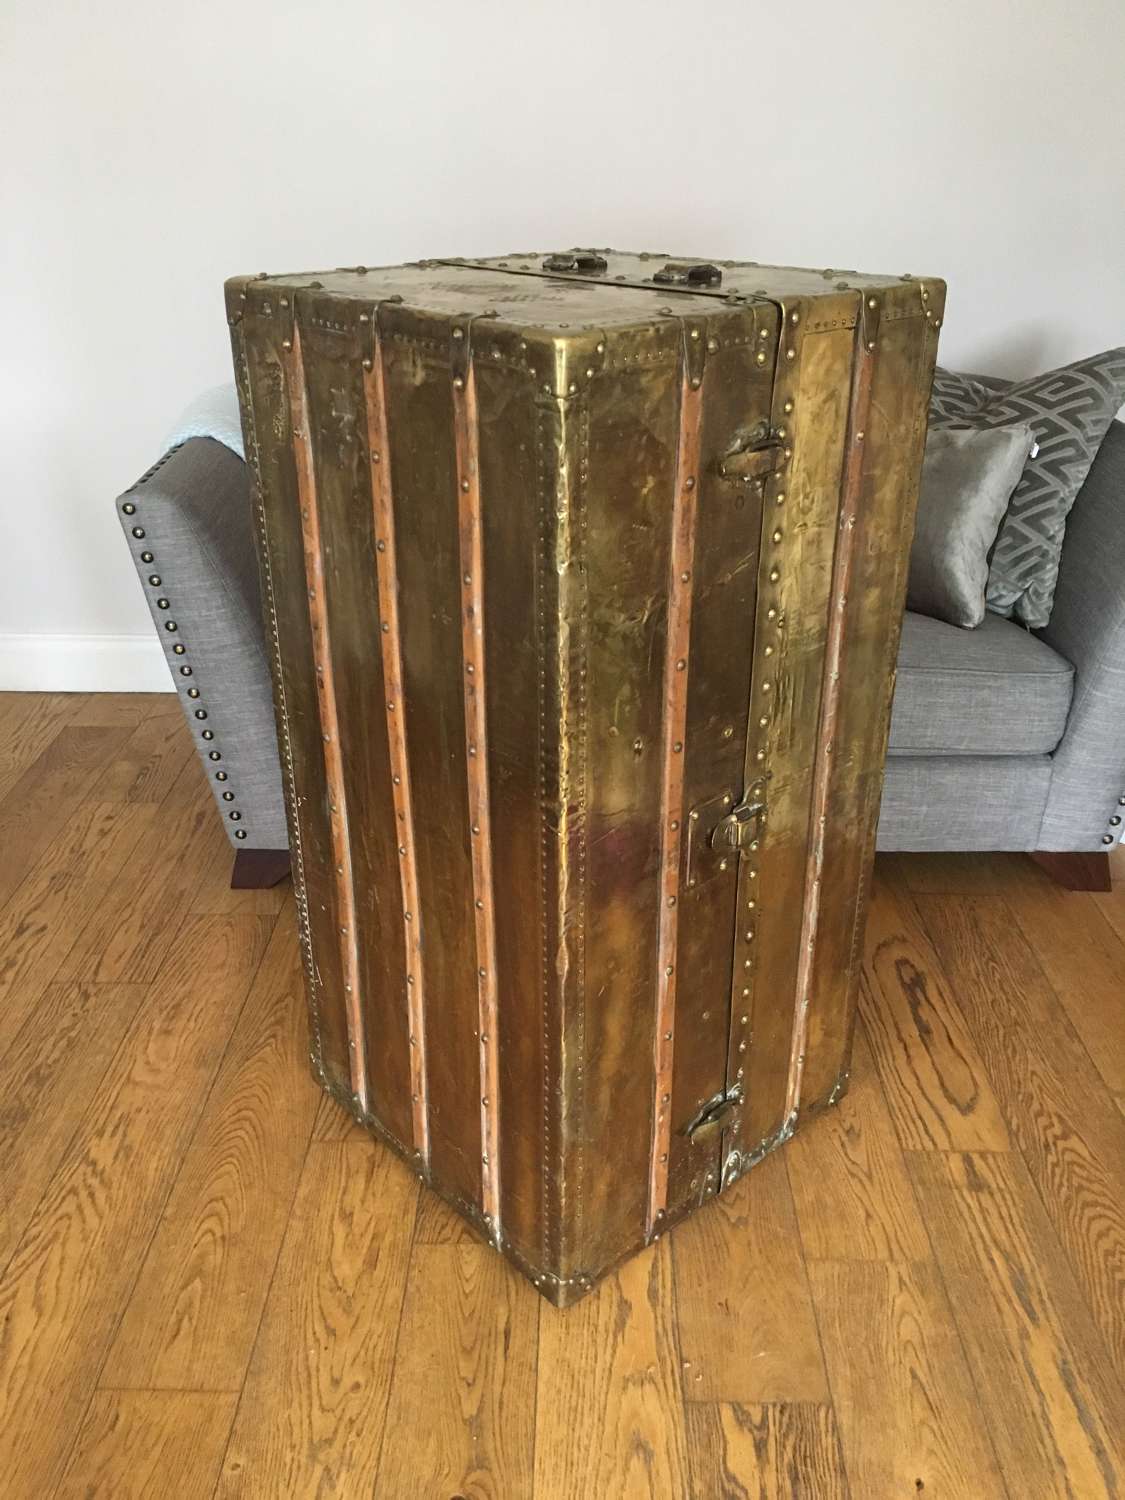 An exceptionally rare all Brass Wardrobe trunk by Louis Vuitton